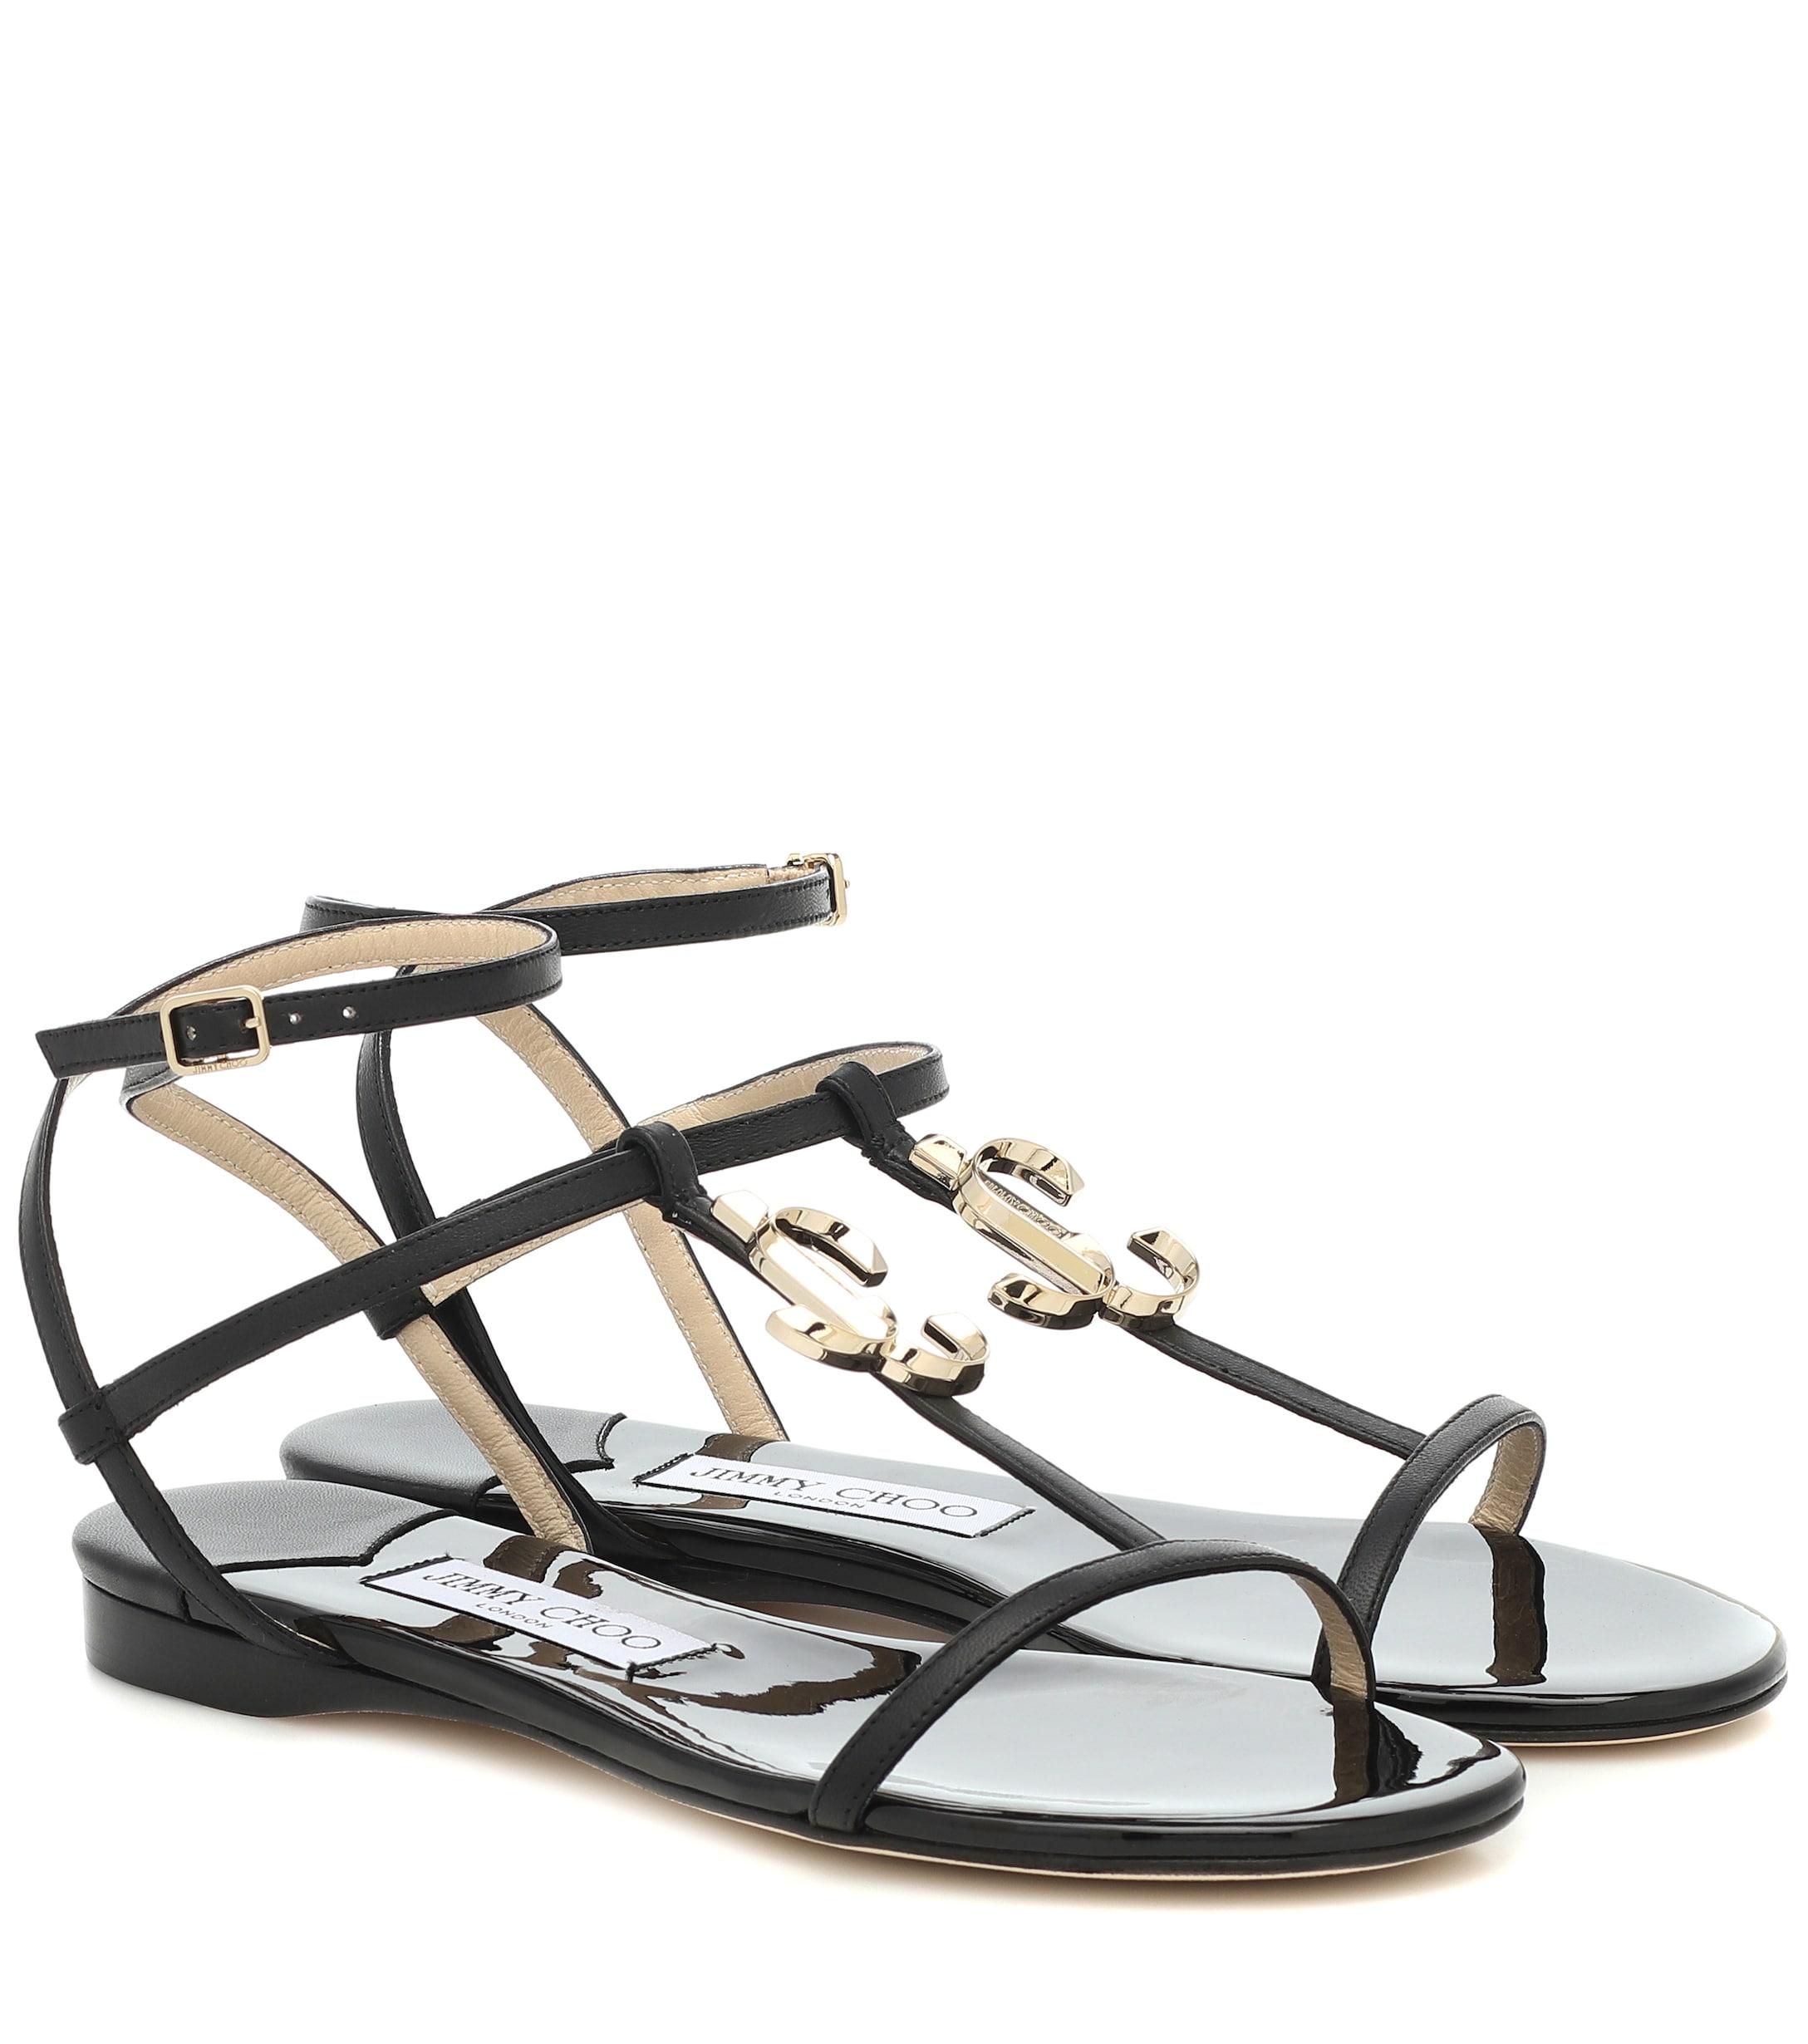 Jimmy Choo Alodie Leather Sandals in Black - Lyst